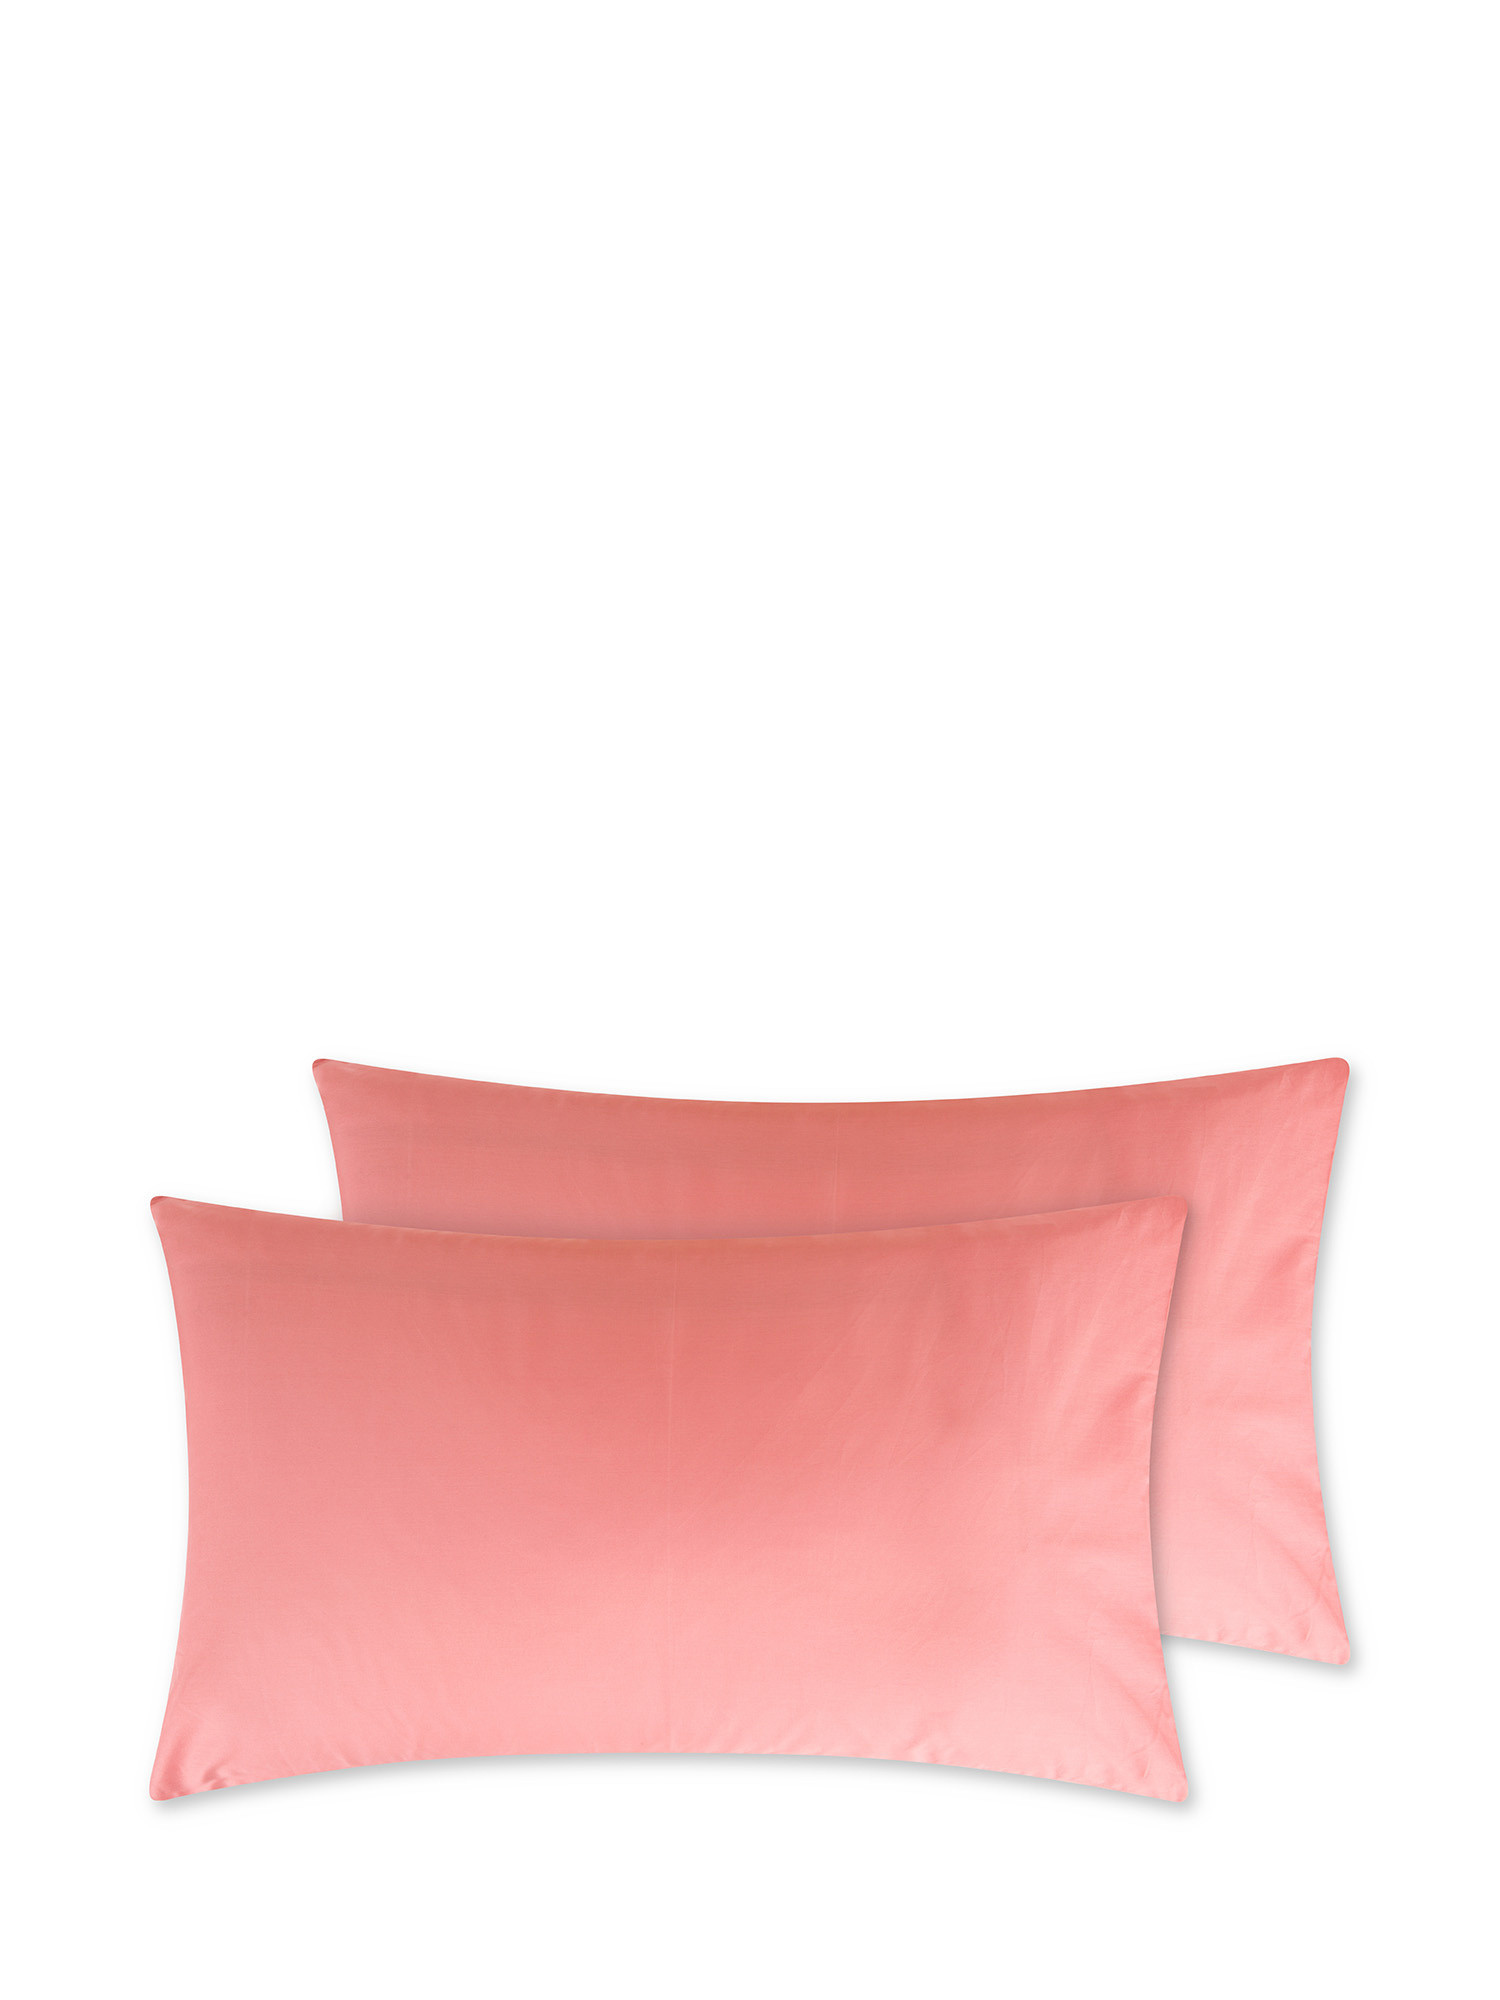 Set of 2 solid color percale cotton pillowcases, Pink, large image number 0